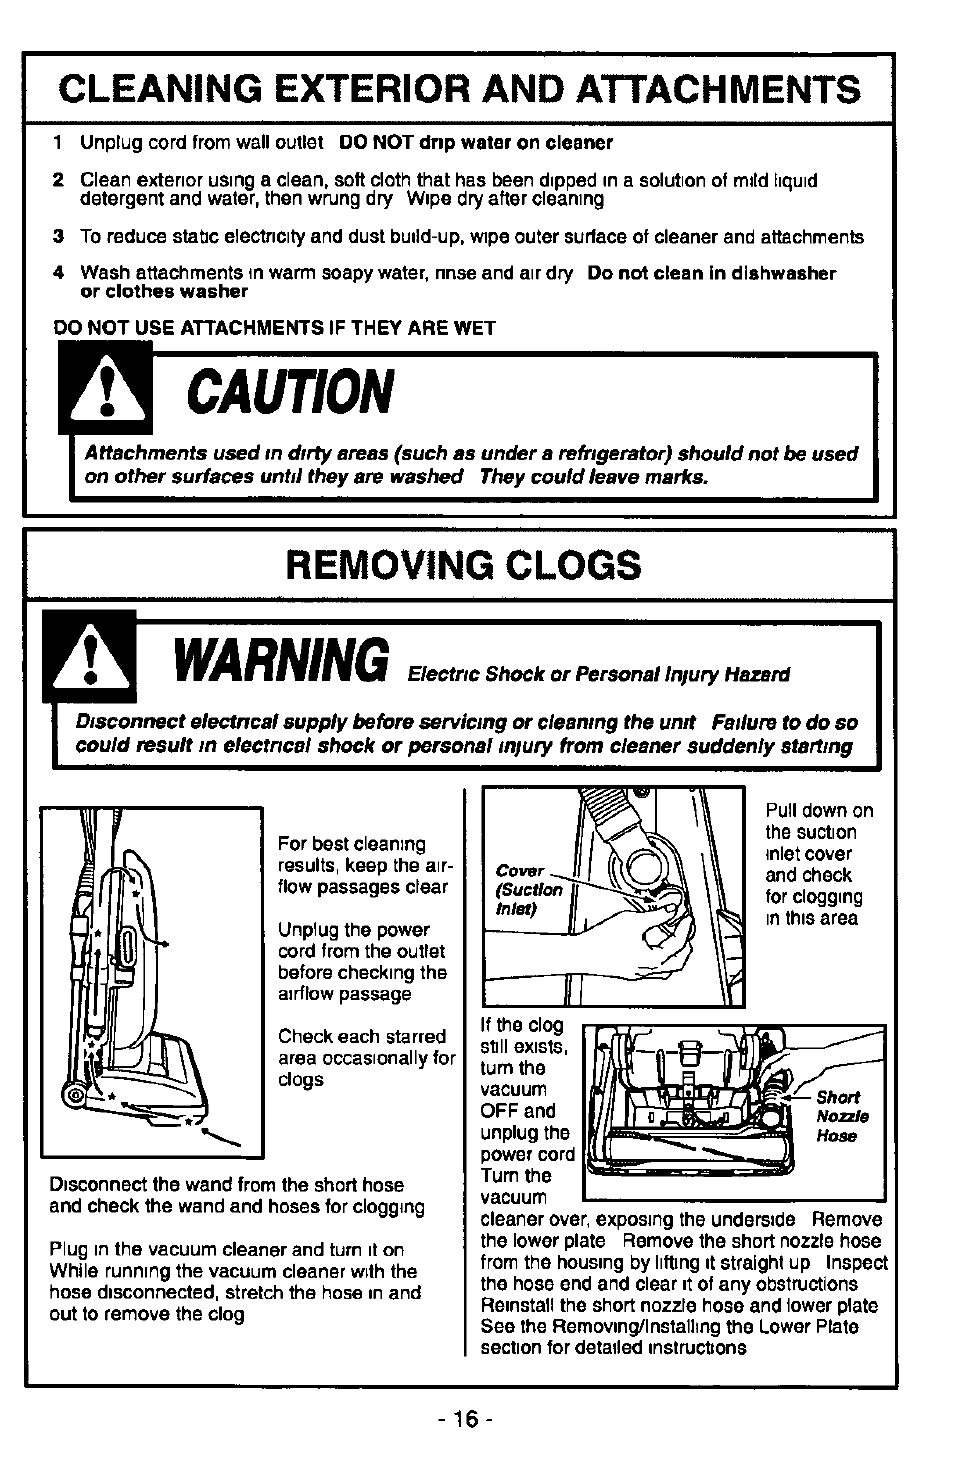 Cleaning exterior and attachments, Removing clogs, Acaution | Warning | Panasonic QUICKDRAW MC-V5117 User Manual | Page 16 / 20